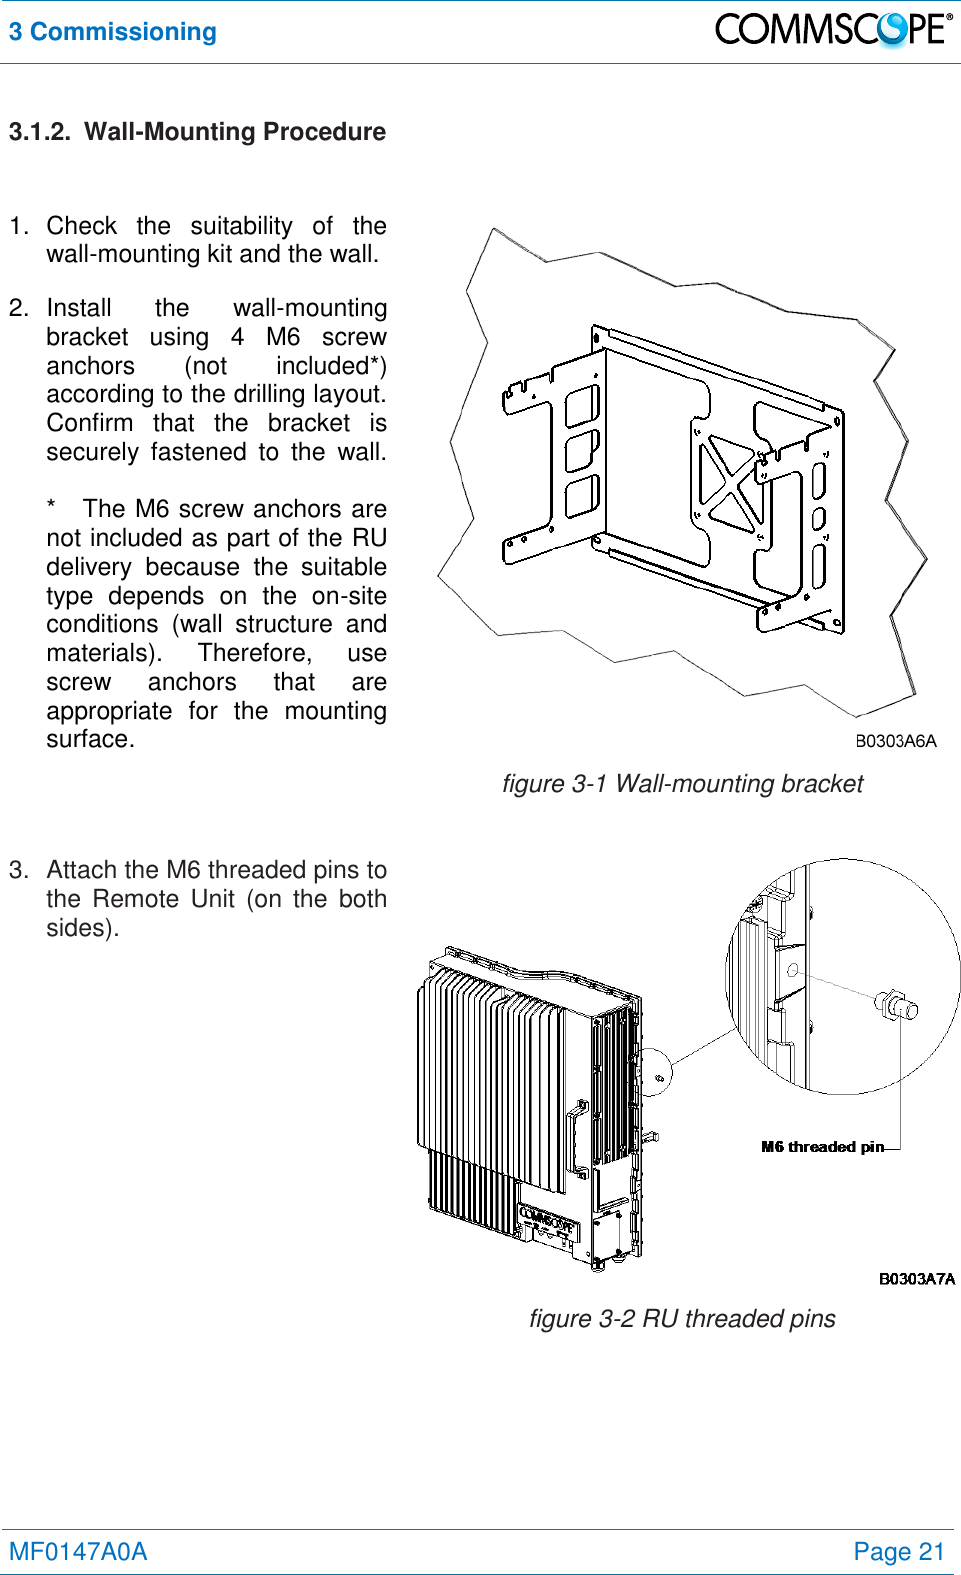 3 Commissioning   MF0147A0A Page 21  3.1.2.  Wall-Mounting Procedure  1.  Check  the  suitability  of  the wall-mounting kit and the wall. 2.  Install  the  wall-mounting bracket  using  4  M6  screw anchors  (not  included*) according to the drilling layout. Confirm  that  the  bracket  is securely  fastened  to  the  wall.  *  The M6 screw anchors are not included as part of the RU delivery  because  the  suitable type  depends  on  the  on-site conditions  (wall  structure  and materials).  Therefore,  use screw  anchors  that  are appropriate  for  the  mounting surface.  figure 3-1 Wall-mounting bracket 3.  Attach the M6 threaded pins to the  Remote  Unit  (on  the  both sides).  figure 3-2 RU threaded pins 